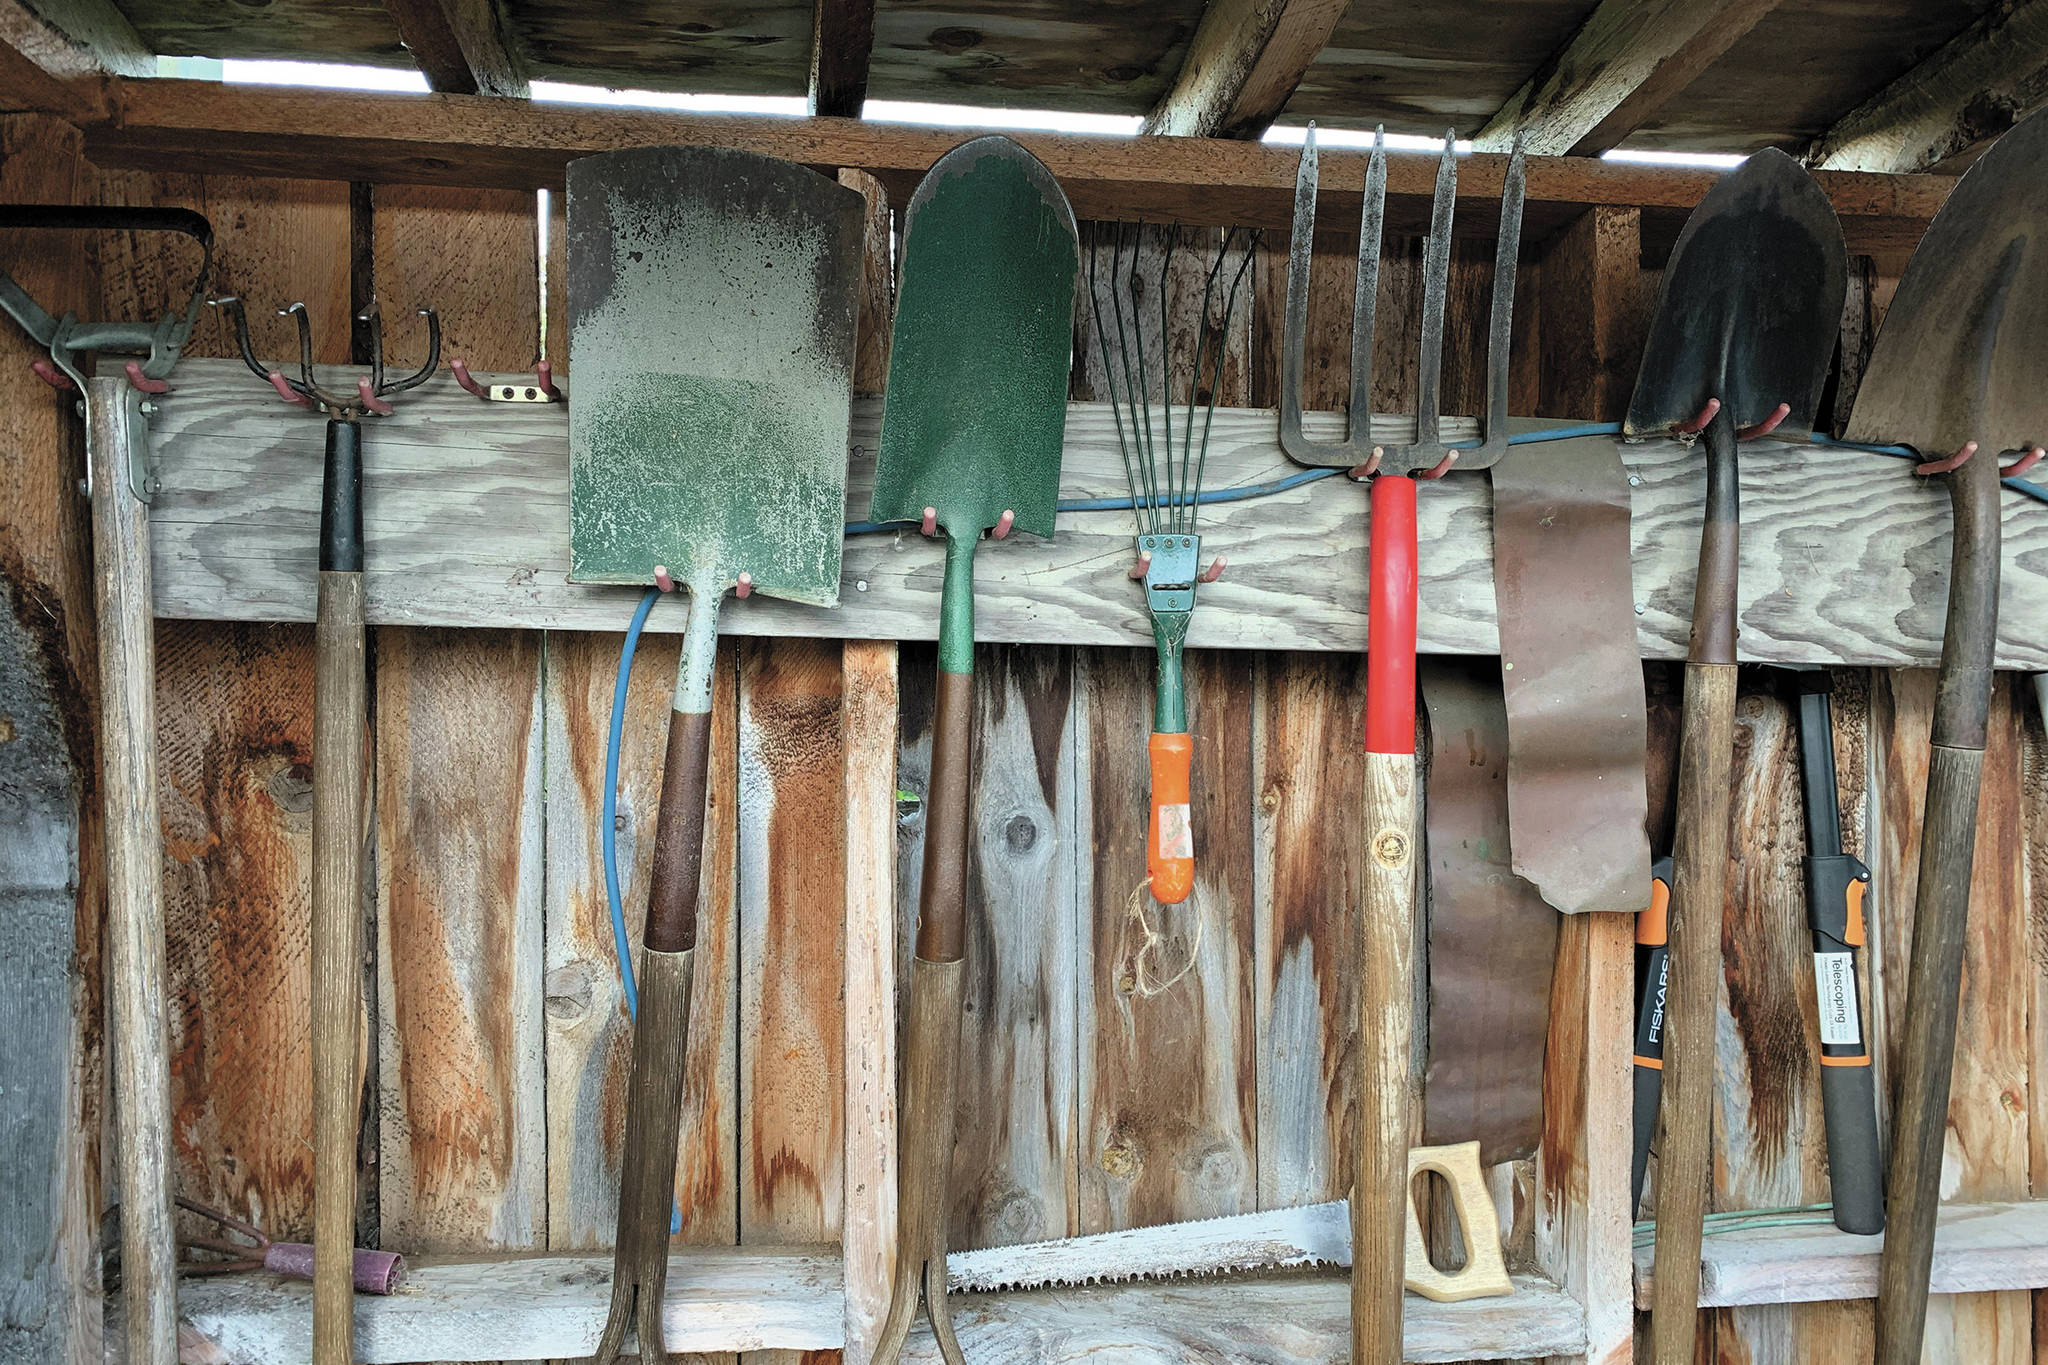 Now is that time to clean and sharpen garden tools to get them ready for next season, as seen here on Wednesday, Oct. 21, 2020, in the Kachemak Gardener's shed. (Photo by Rosemary Fitzpatrick)